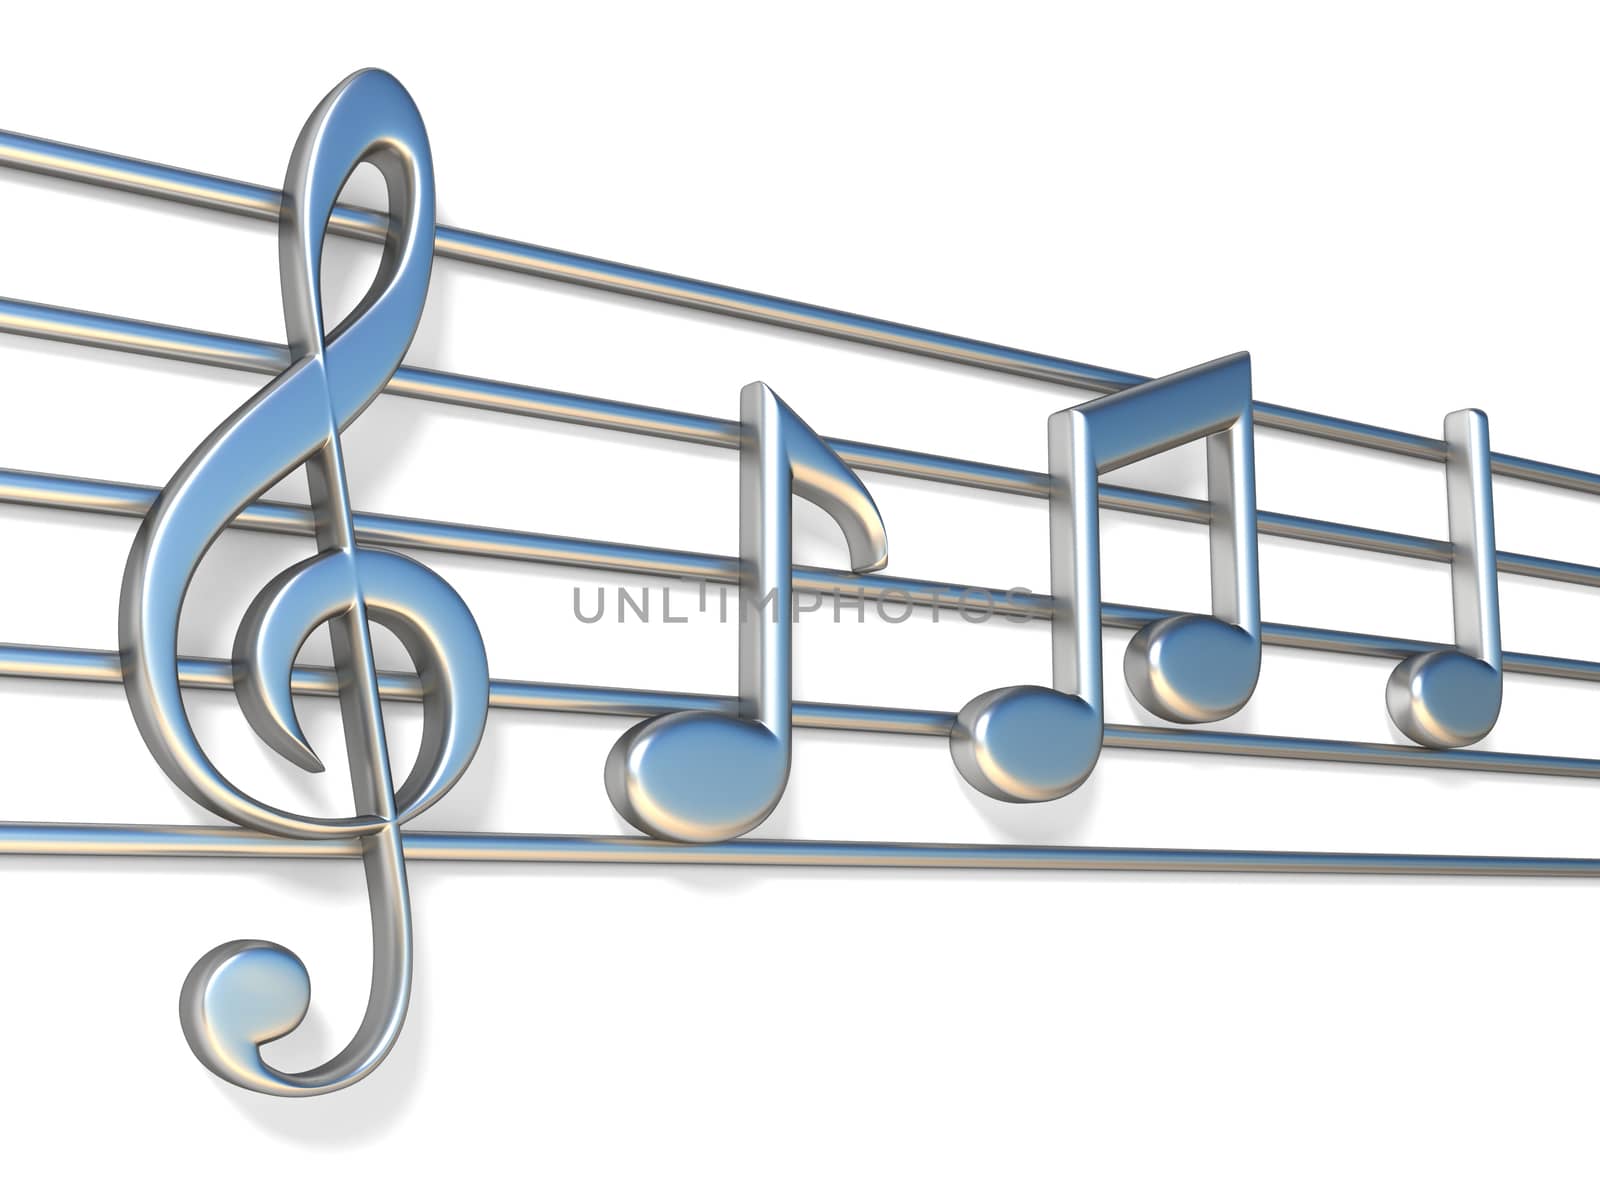 Music notes on staff lines 3D render illustration isolated on white background